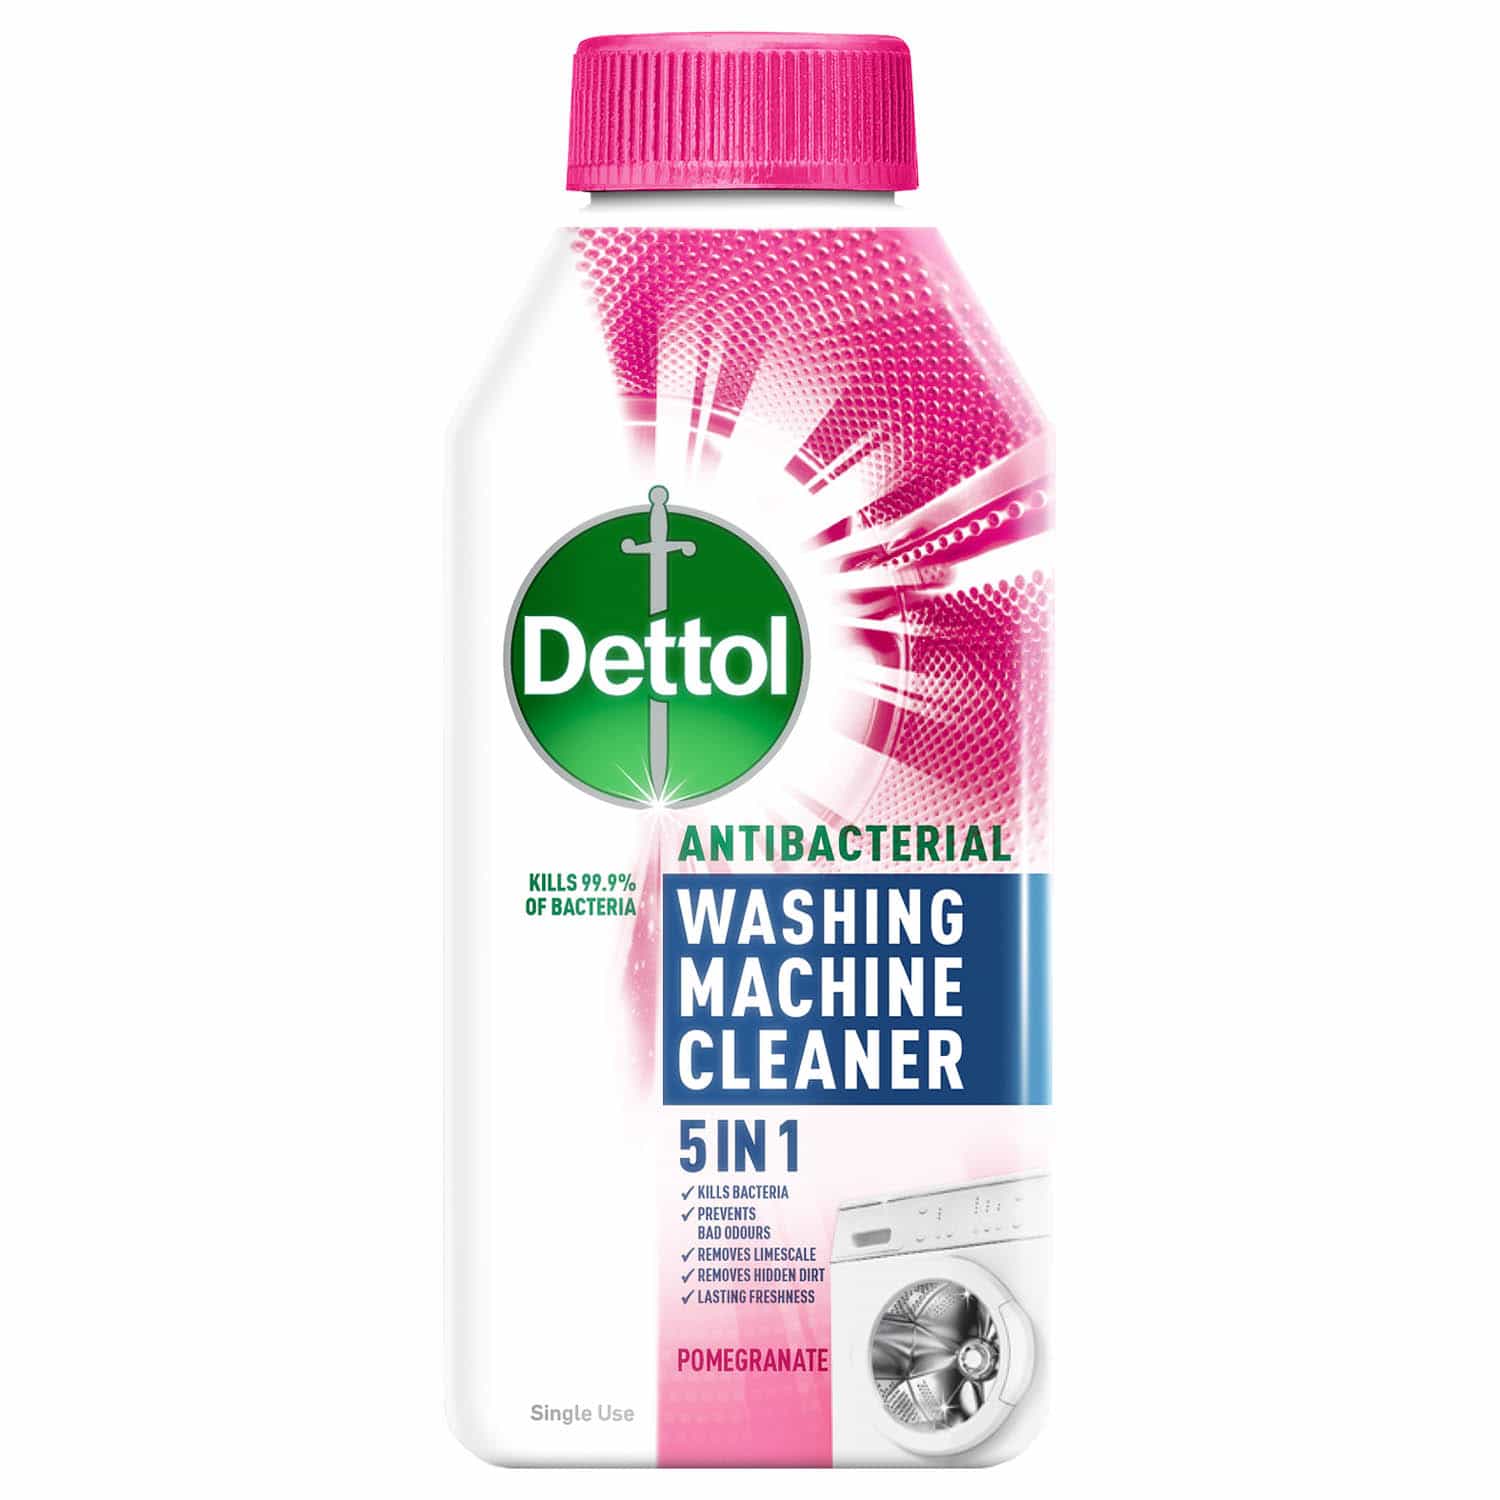 Dettol 5-in-1 Antibacterial Washing Machine Cleaner 250ml - Pomegranate